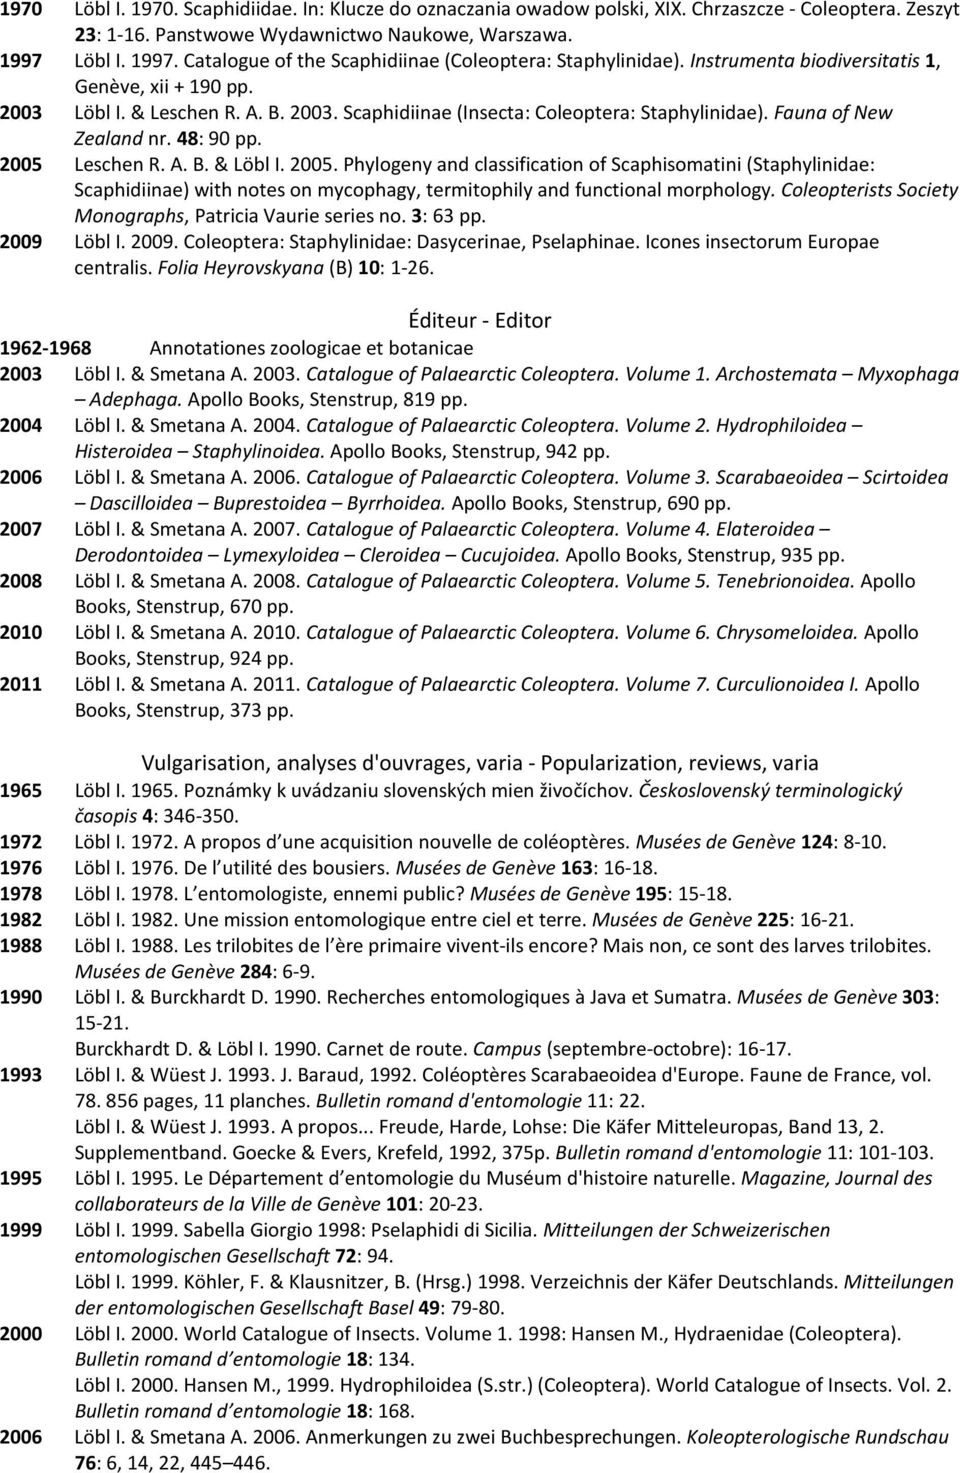 Fauna of New Zealand nr. 48: 90 pp. 2005 Leschen R. A. B. & Löbl I. 2005. Phylogeny and classification of Scaphisomatini (Staphylinidae: Scaphidiinae) with notes on mycophagy, termitophily and functional morphology.